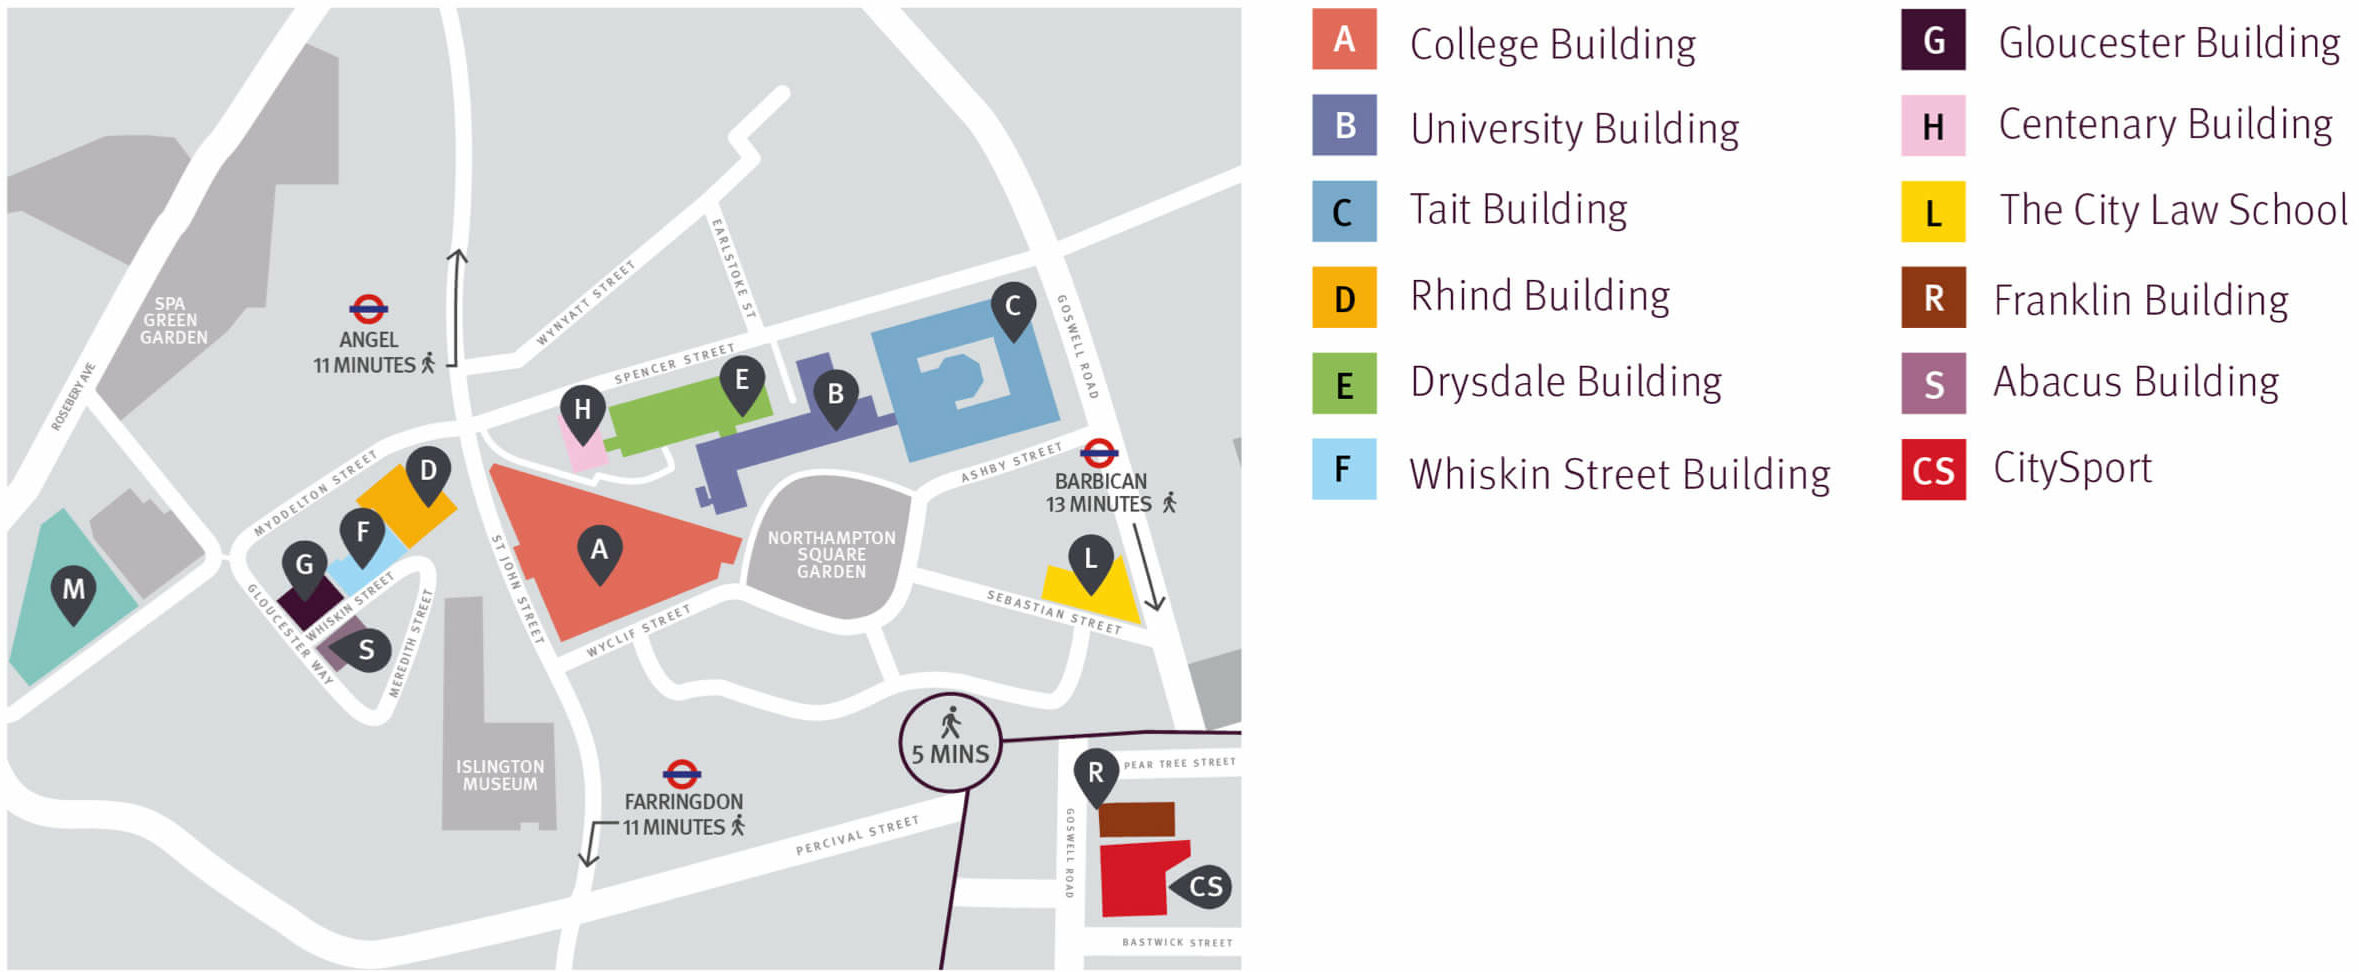 Campus map for Chinese microsite